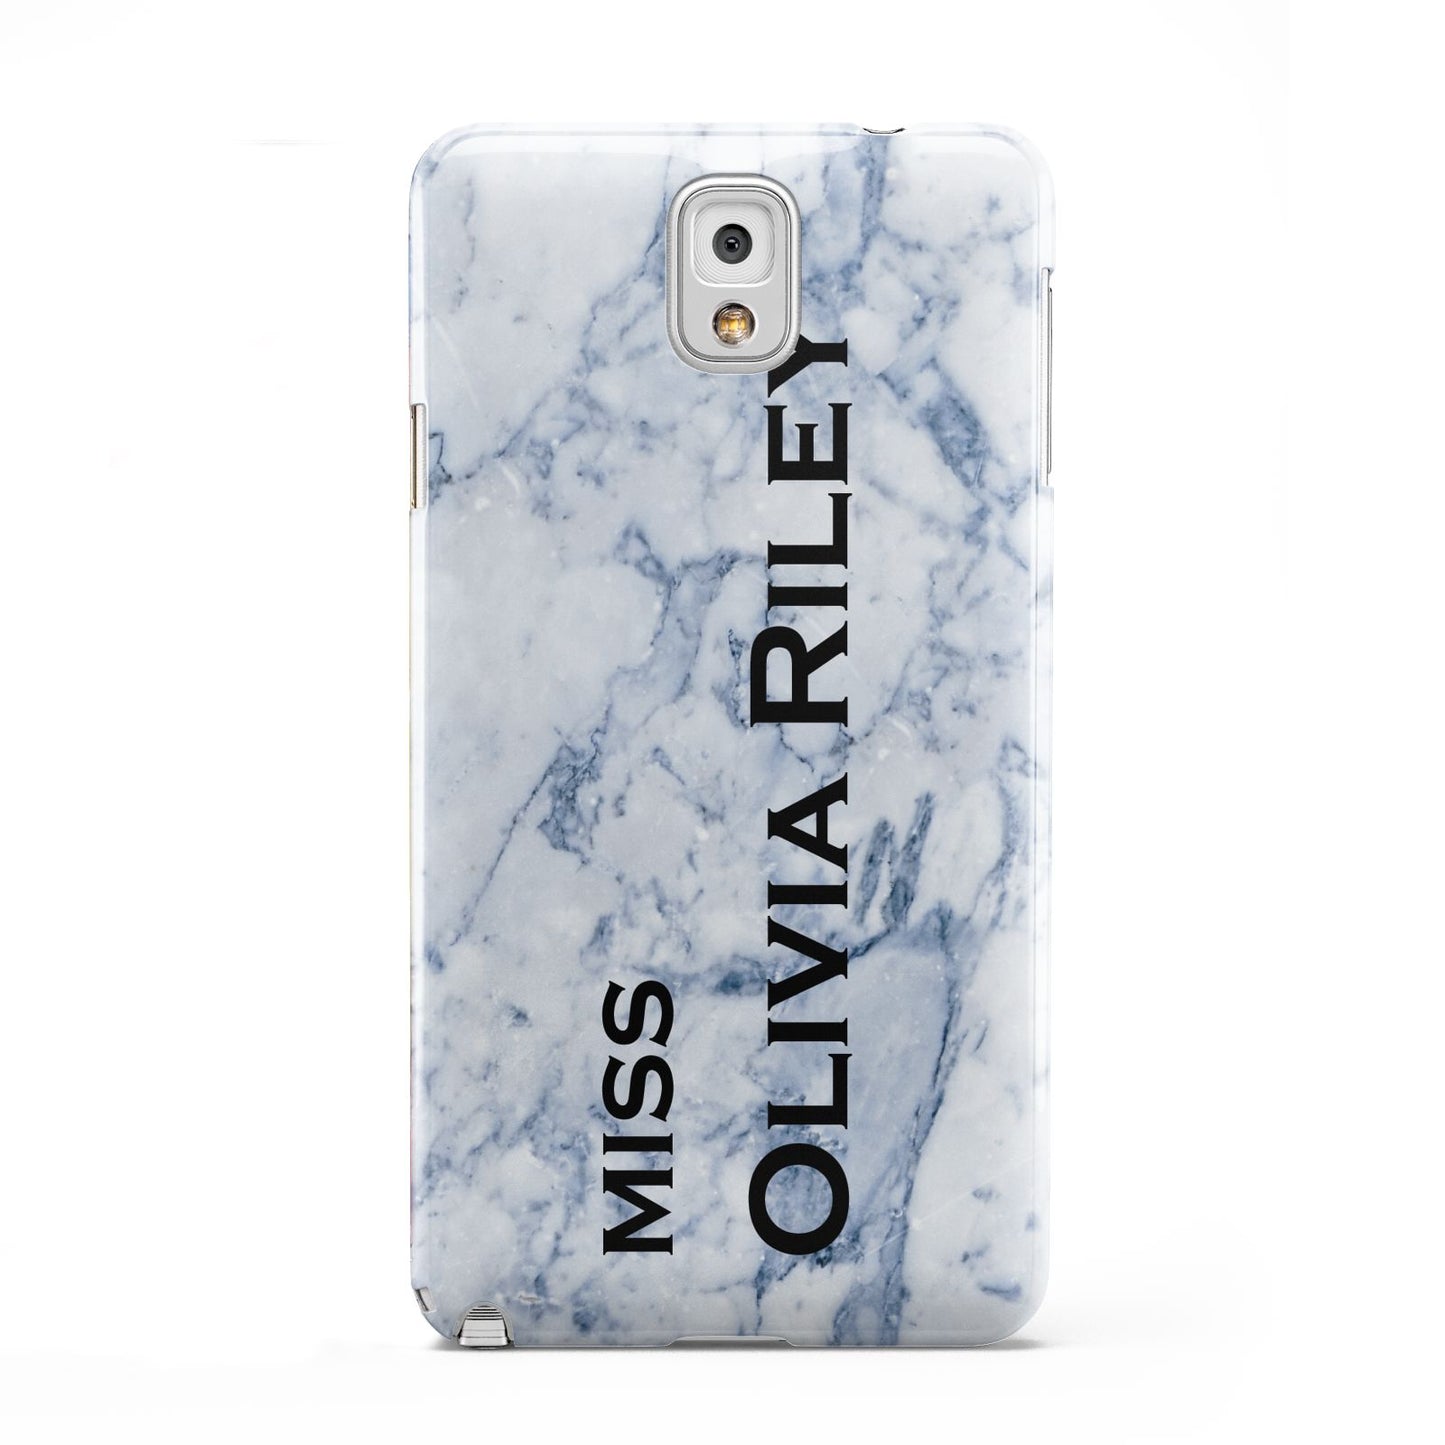 Full Name Grey Marble Samsung Galaxy Note 3 Case